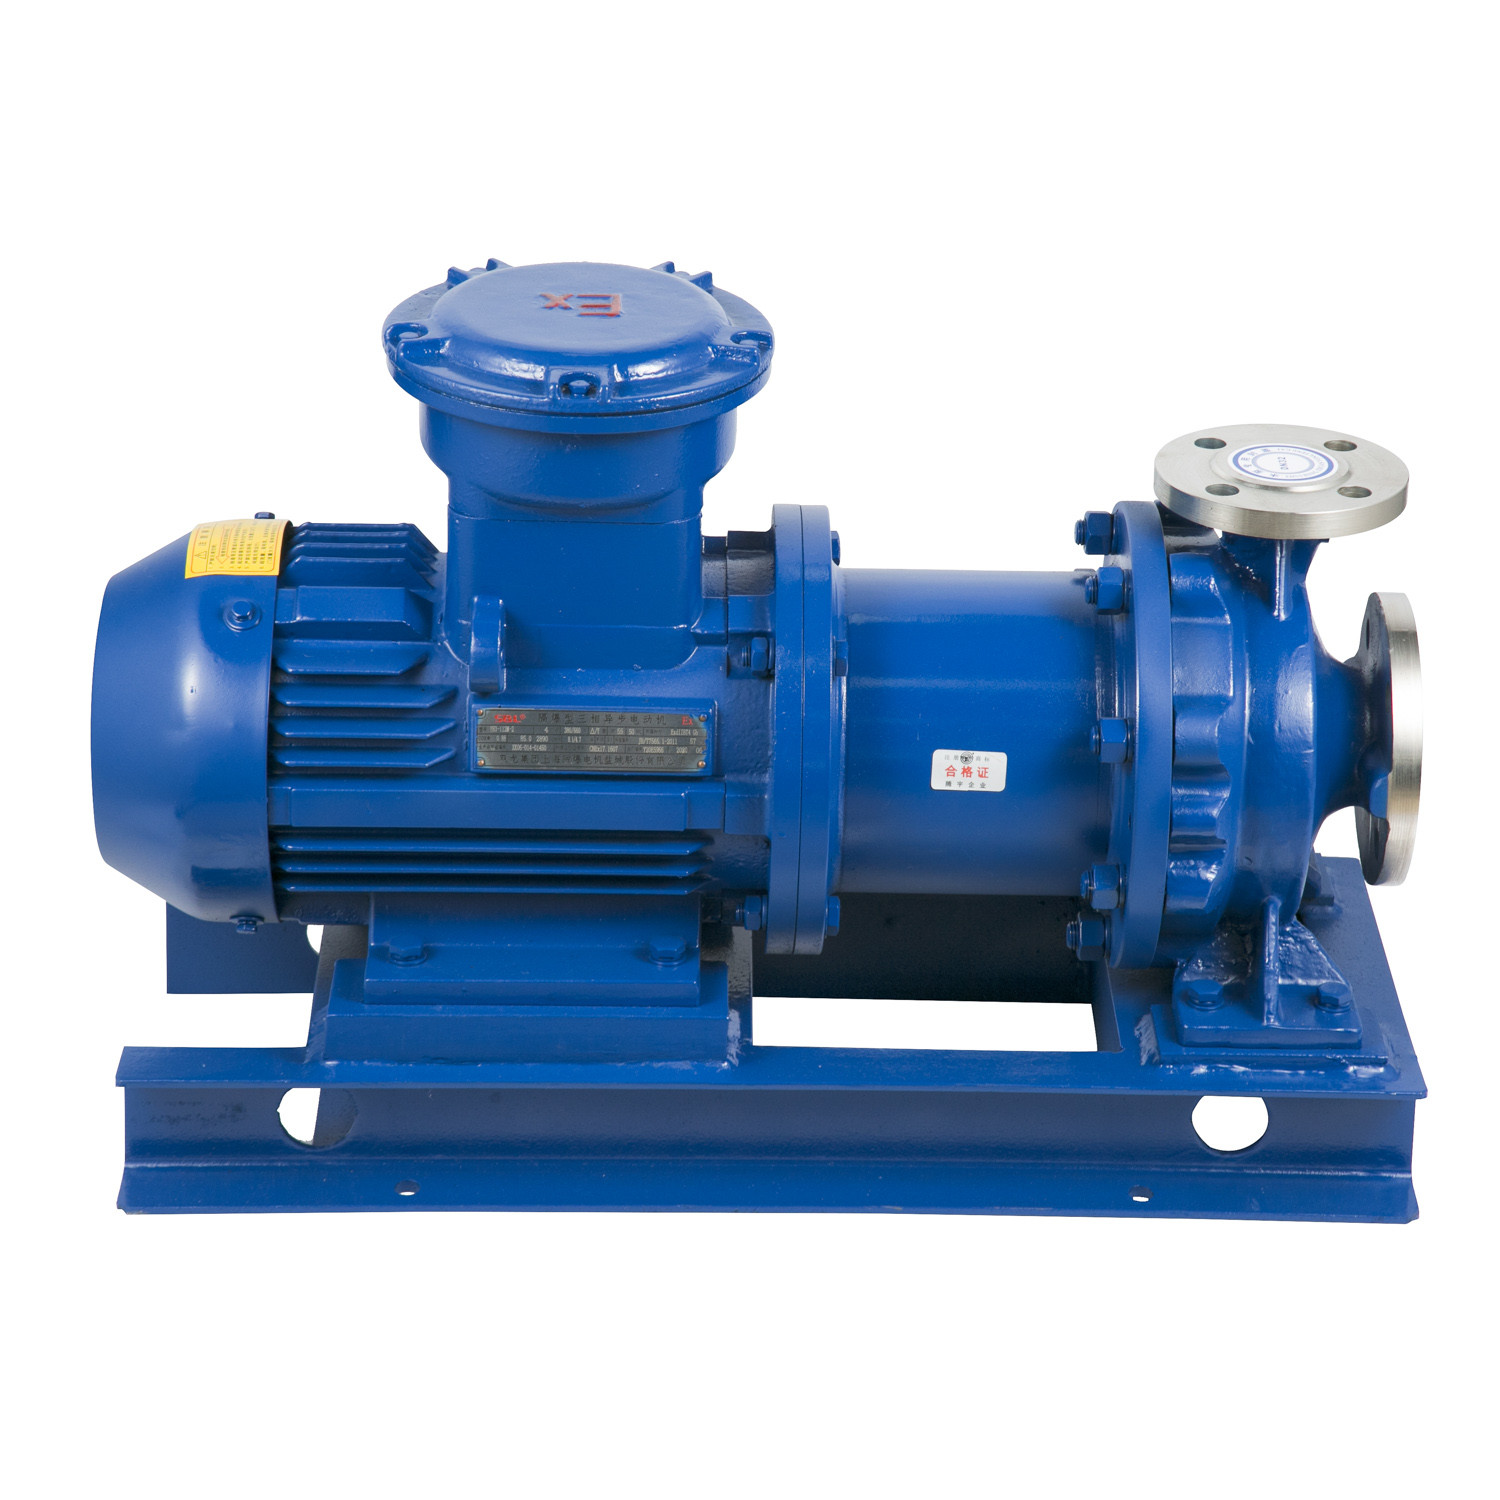 Magnetic Drive Oil Chemical Process Sealless Pump